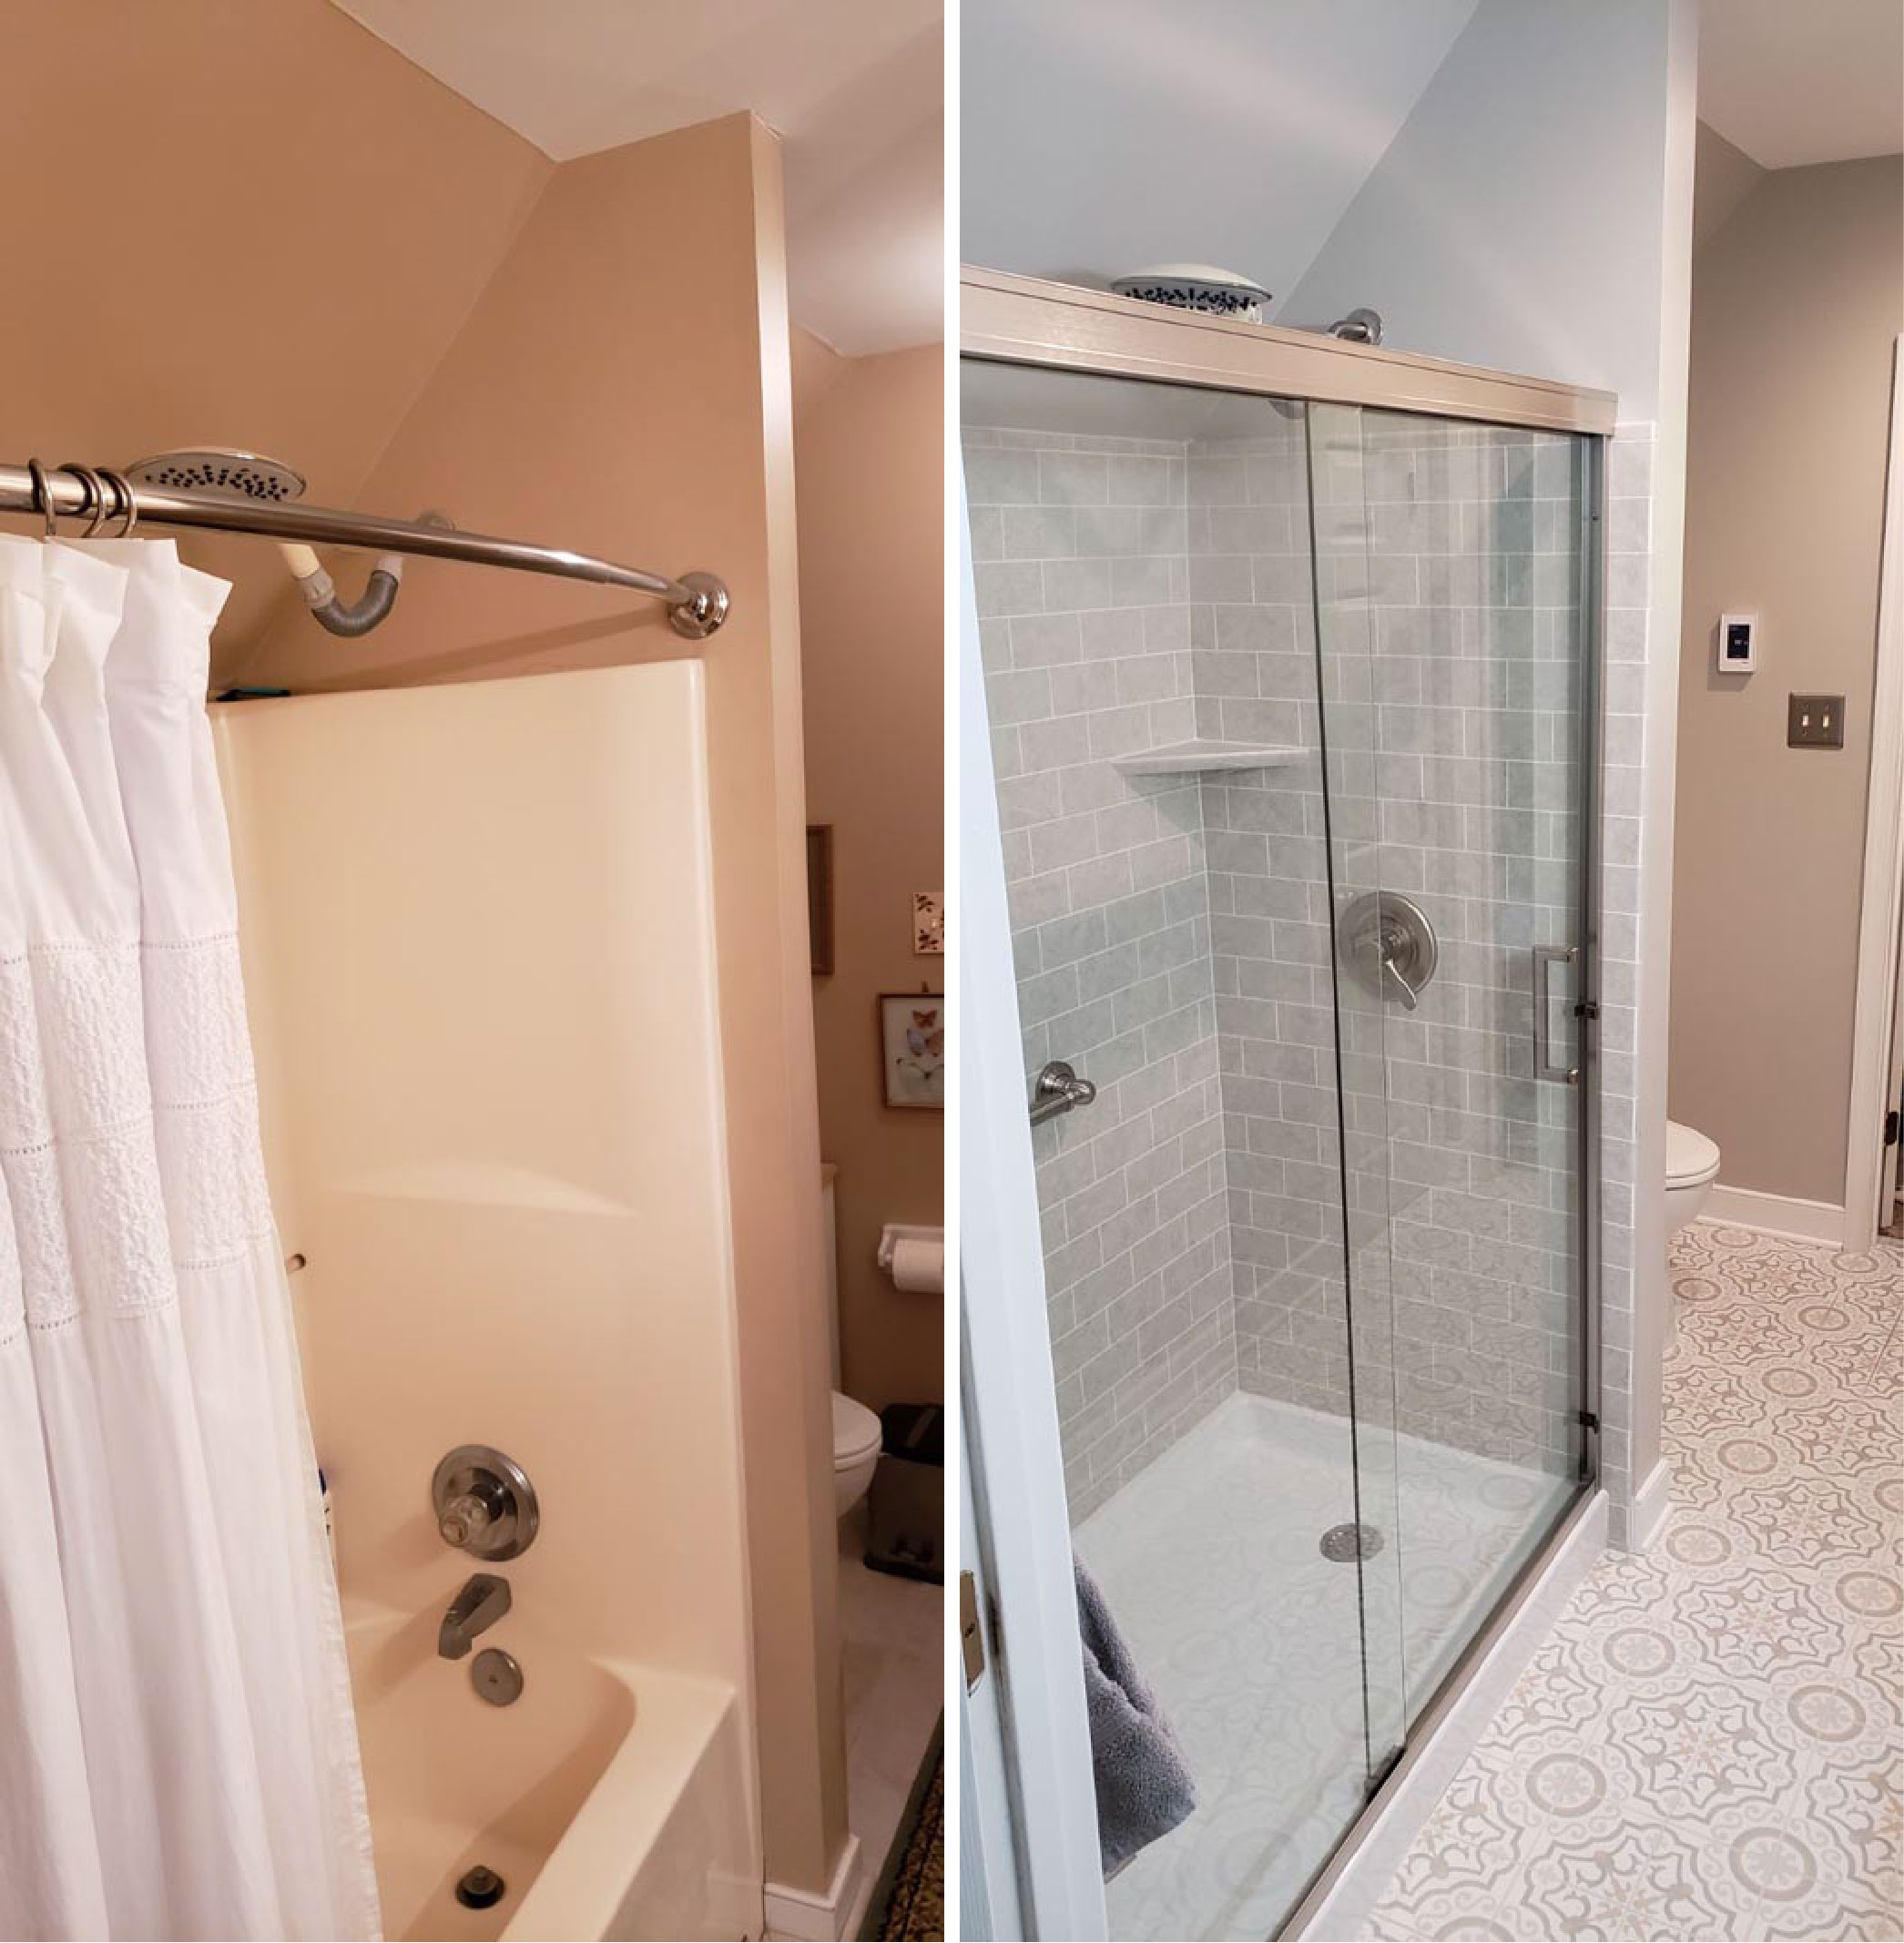 Costs Of Installing A Walk In Shower, Average Cost To Remove Bathtub And Install Walk In Shower